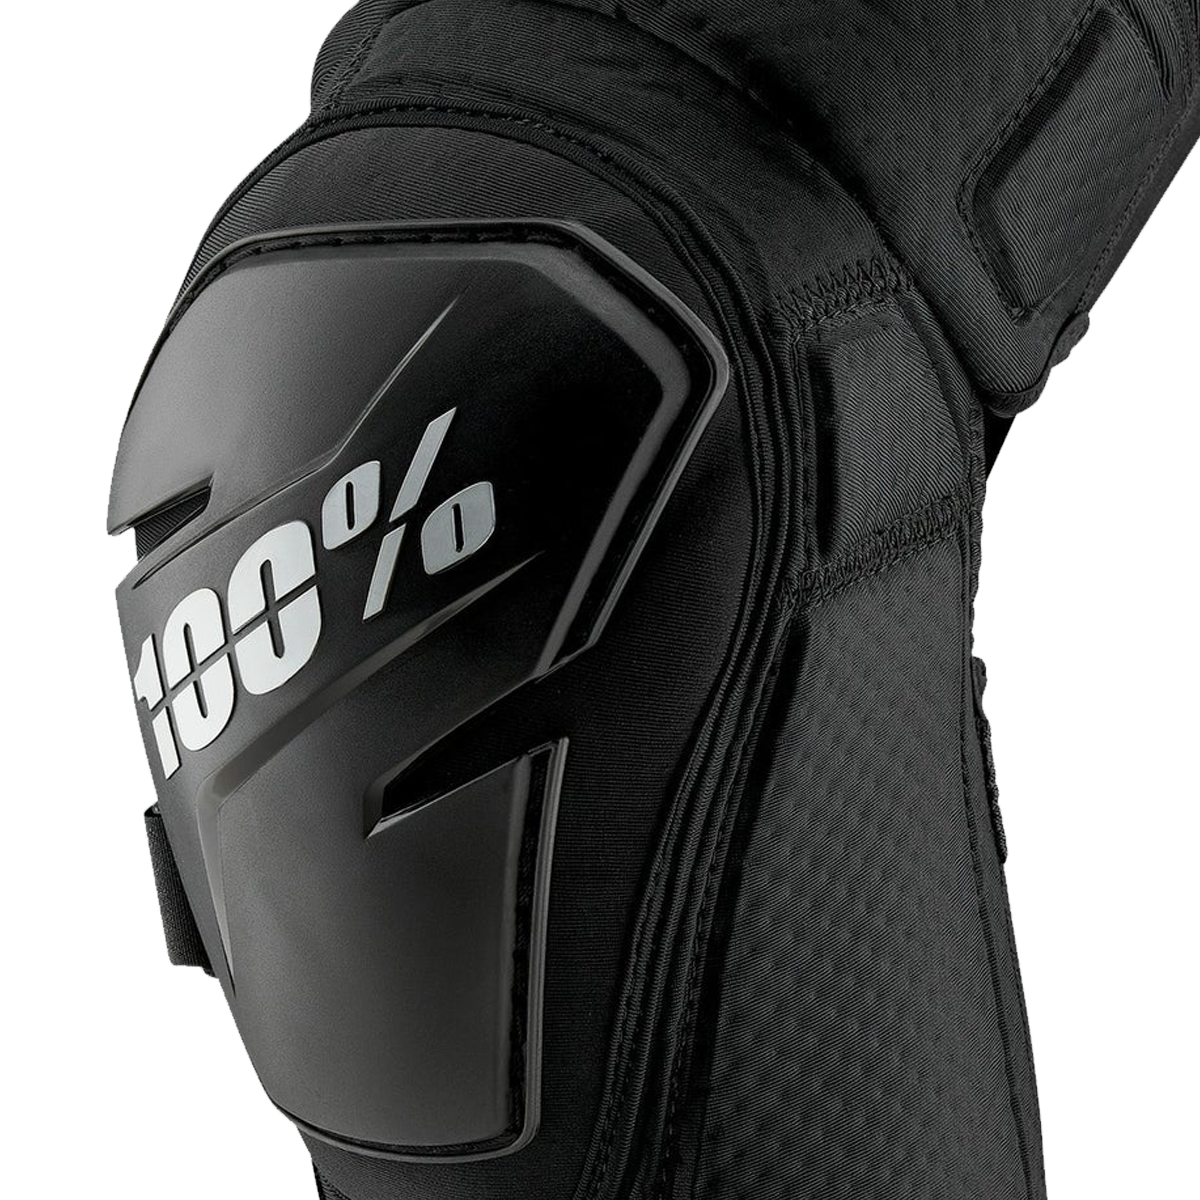 Fortis Knee Guards alternate view